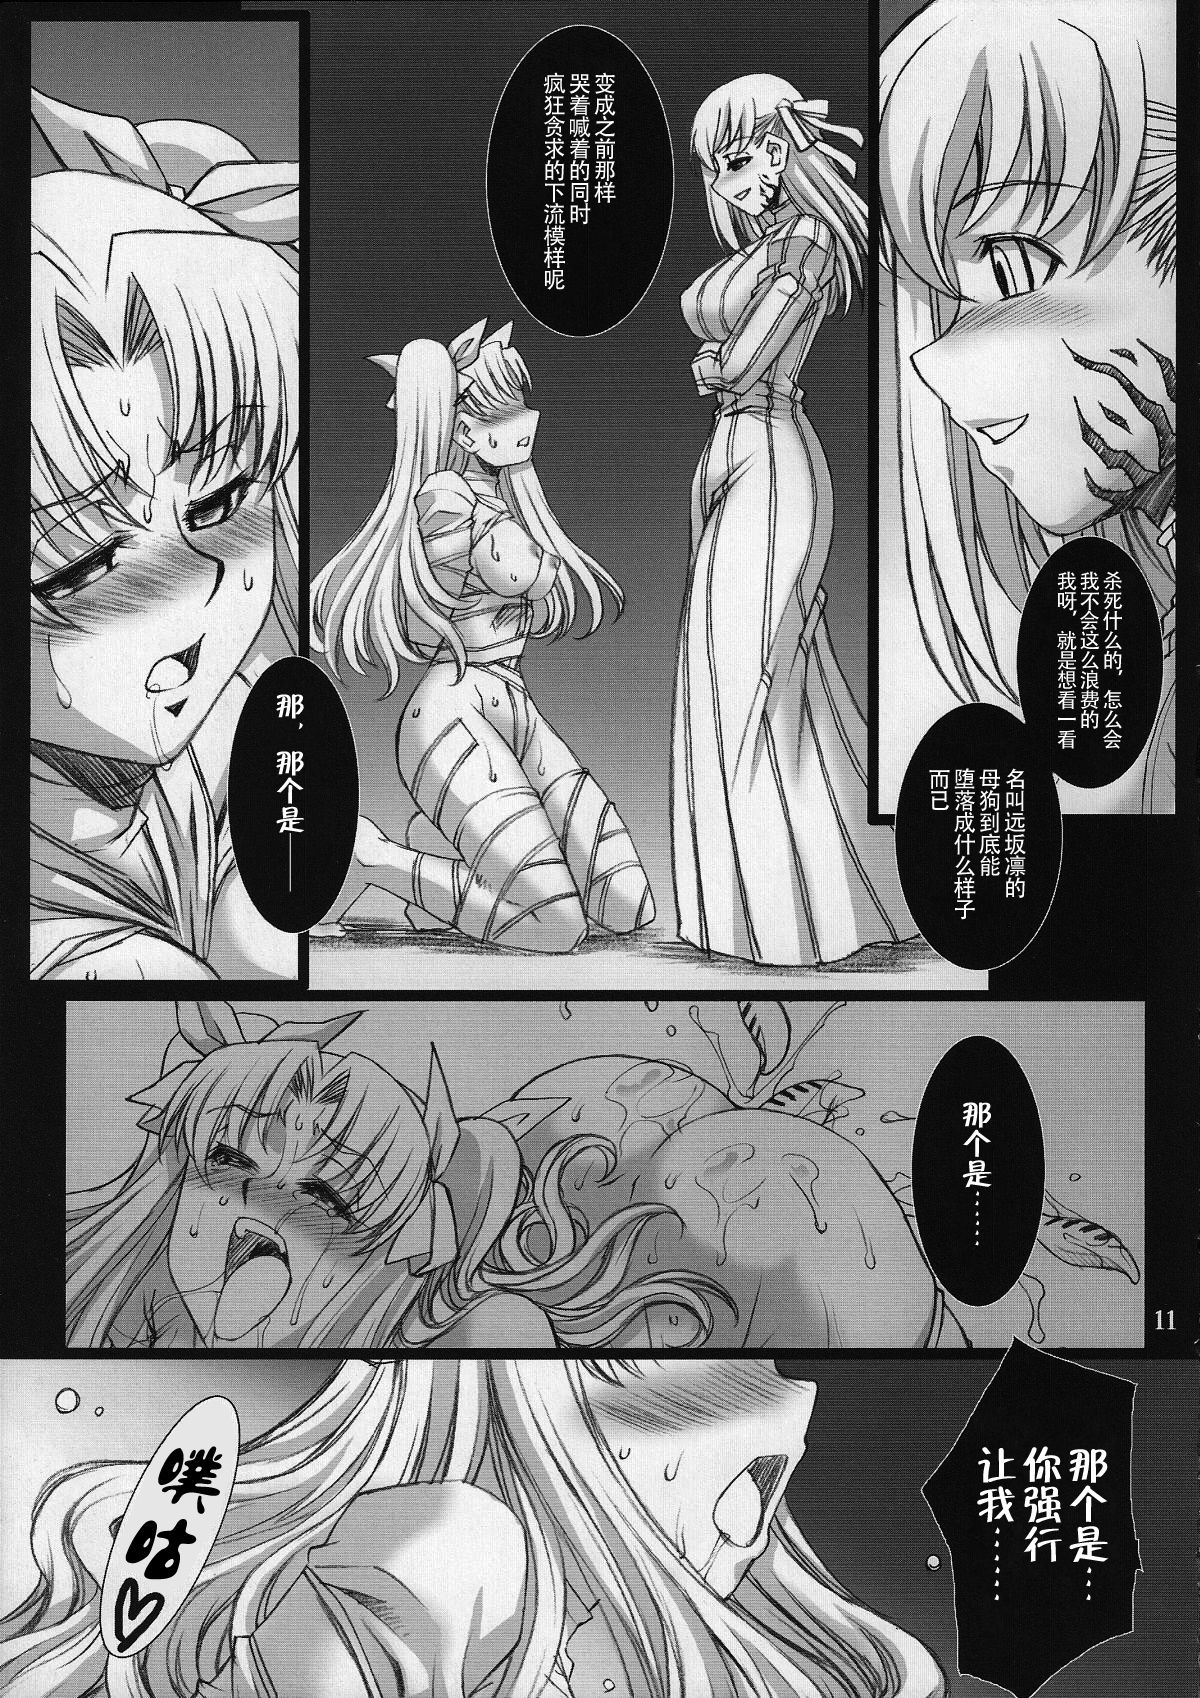 (COMIC1☆2) [H.B (B-RIVER)] Red Degeneration -DAY/3- (Fate/stay night) [Chinese] [不咕鸟汉化组] (COMIC1☆2) [H・B (B-RIVER)] Red Degeneration -DAY/3- (Fate/stay night) [中国翻訳]